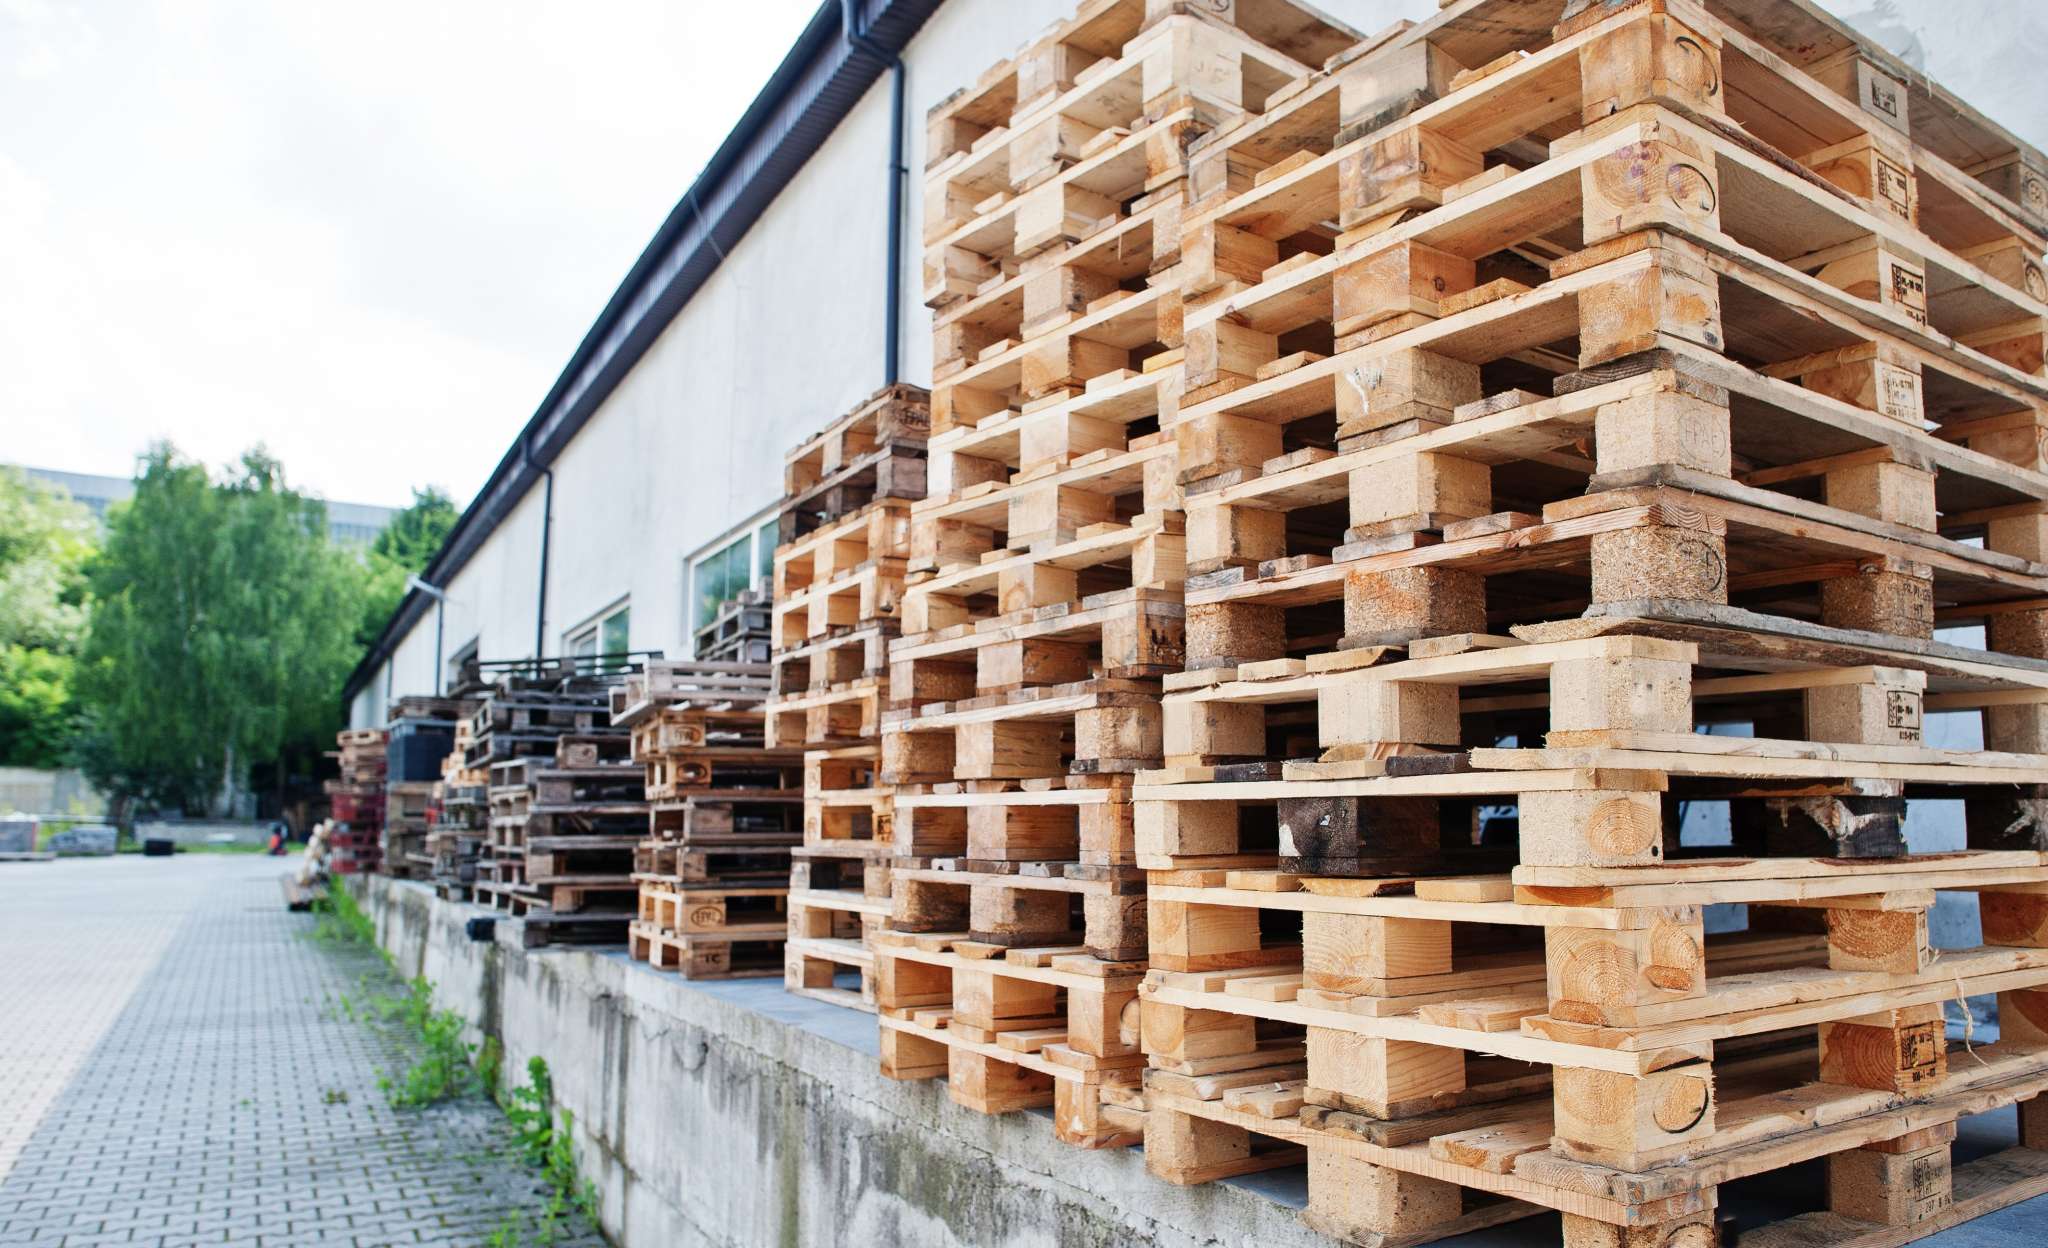 Why use pallets for container shipments?